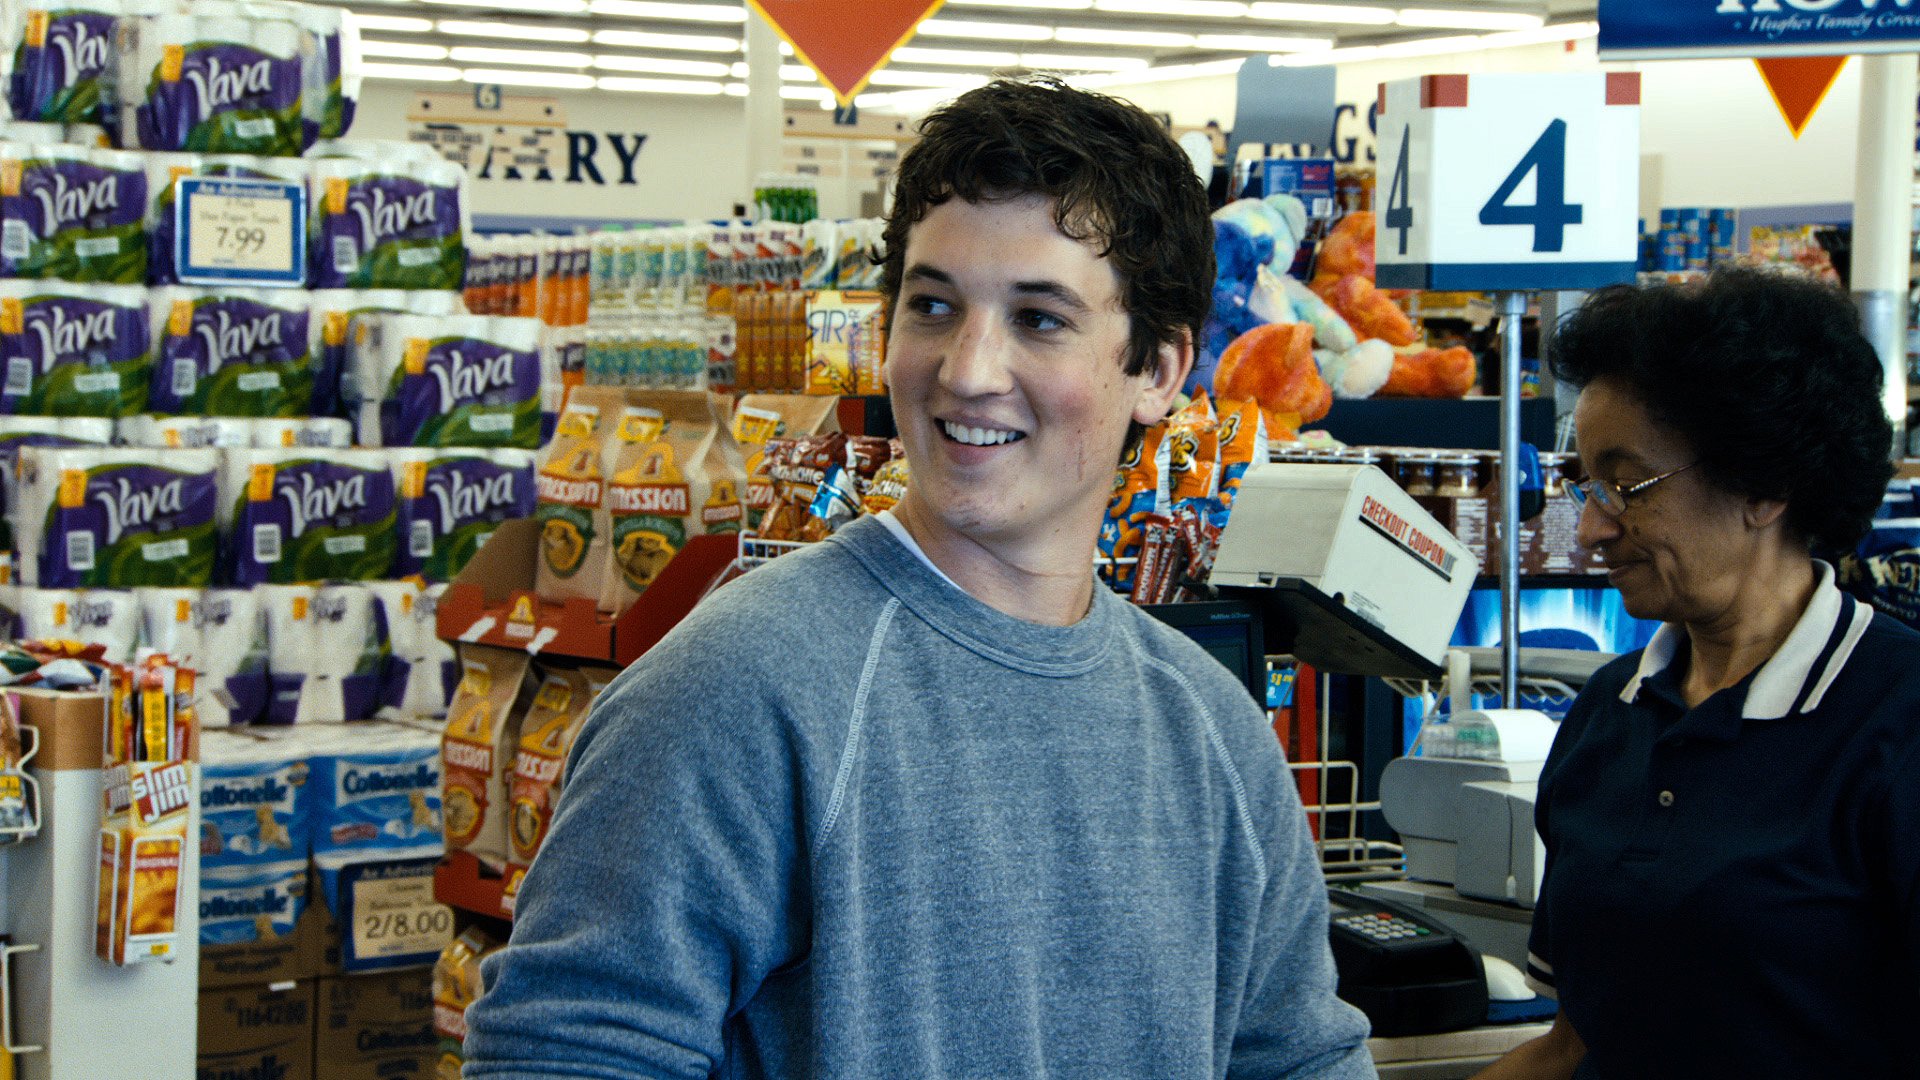 Miles Teller in Warner Bros. Pictures' Project X (2012)